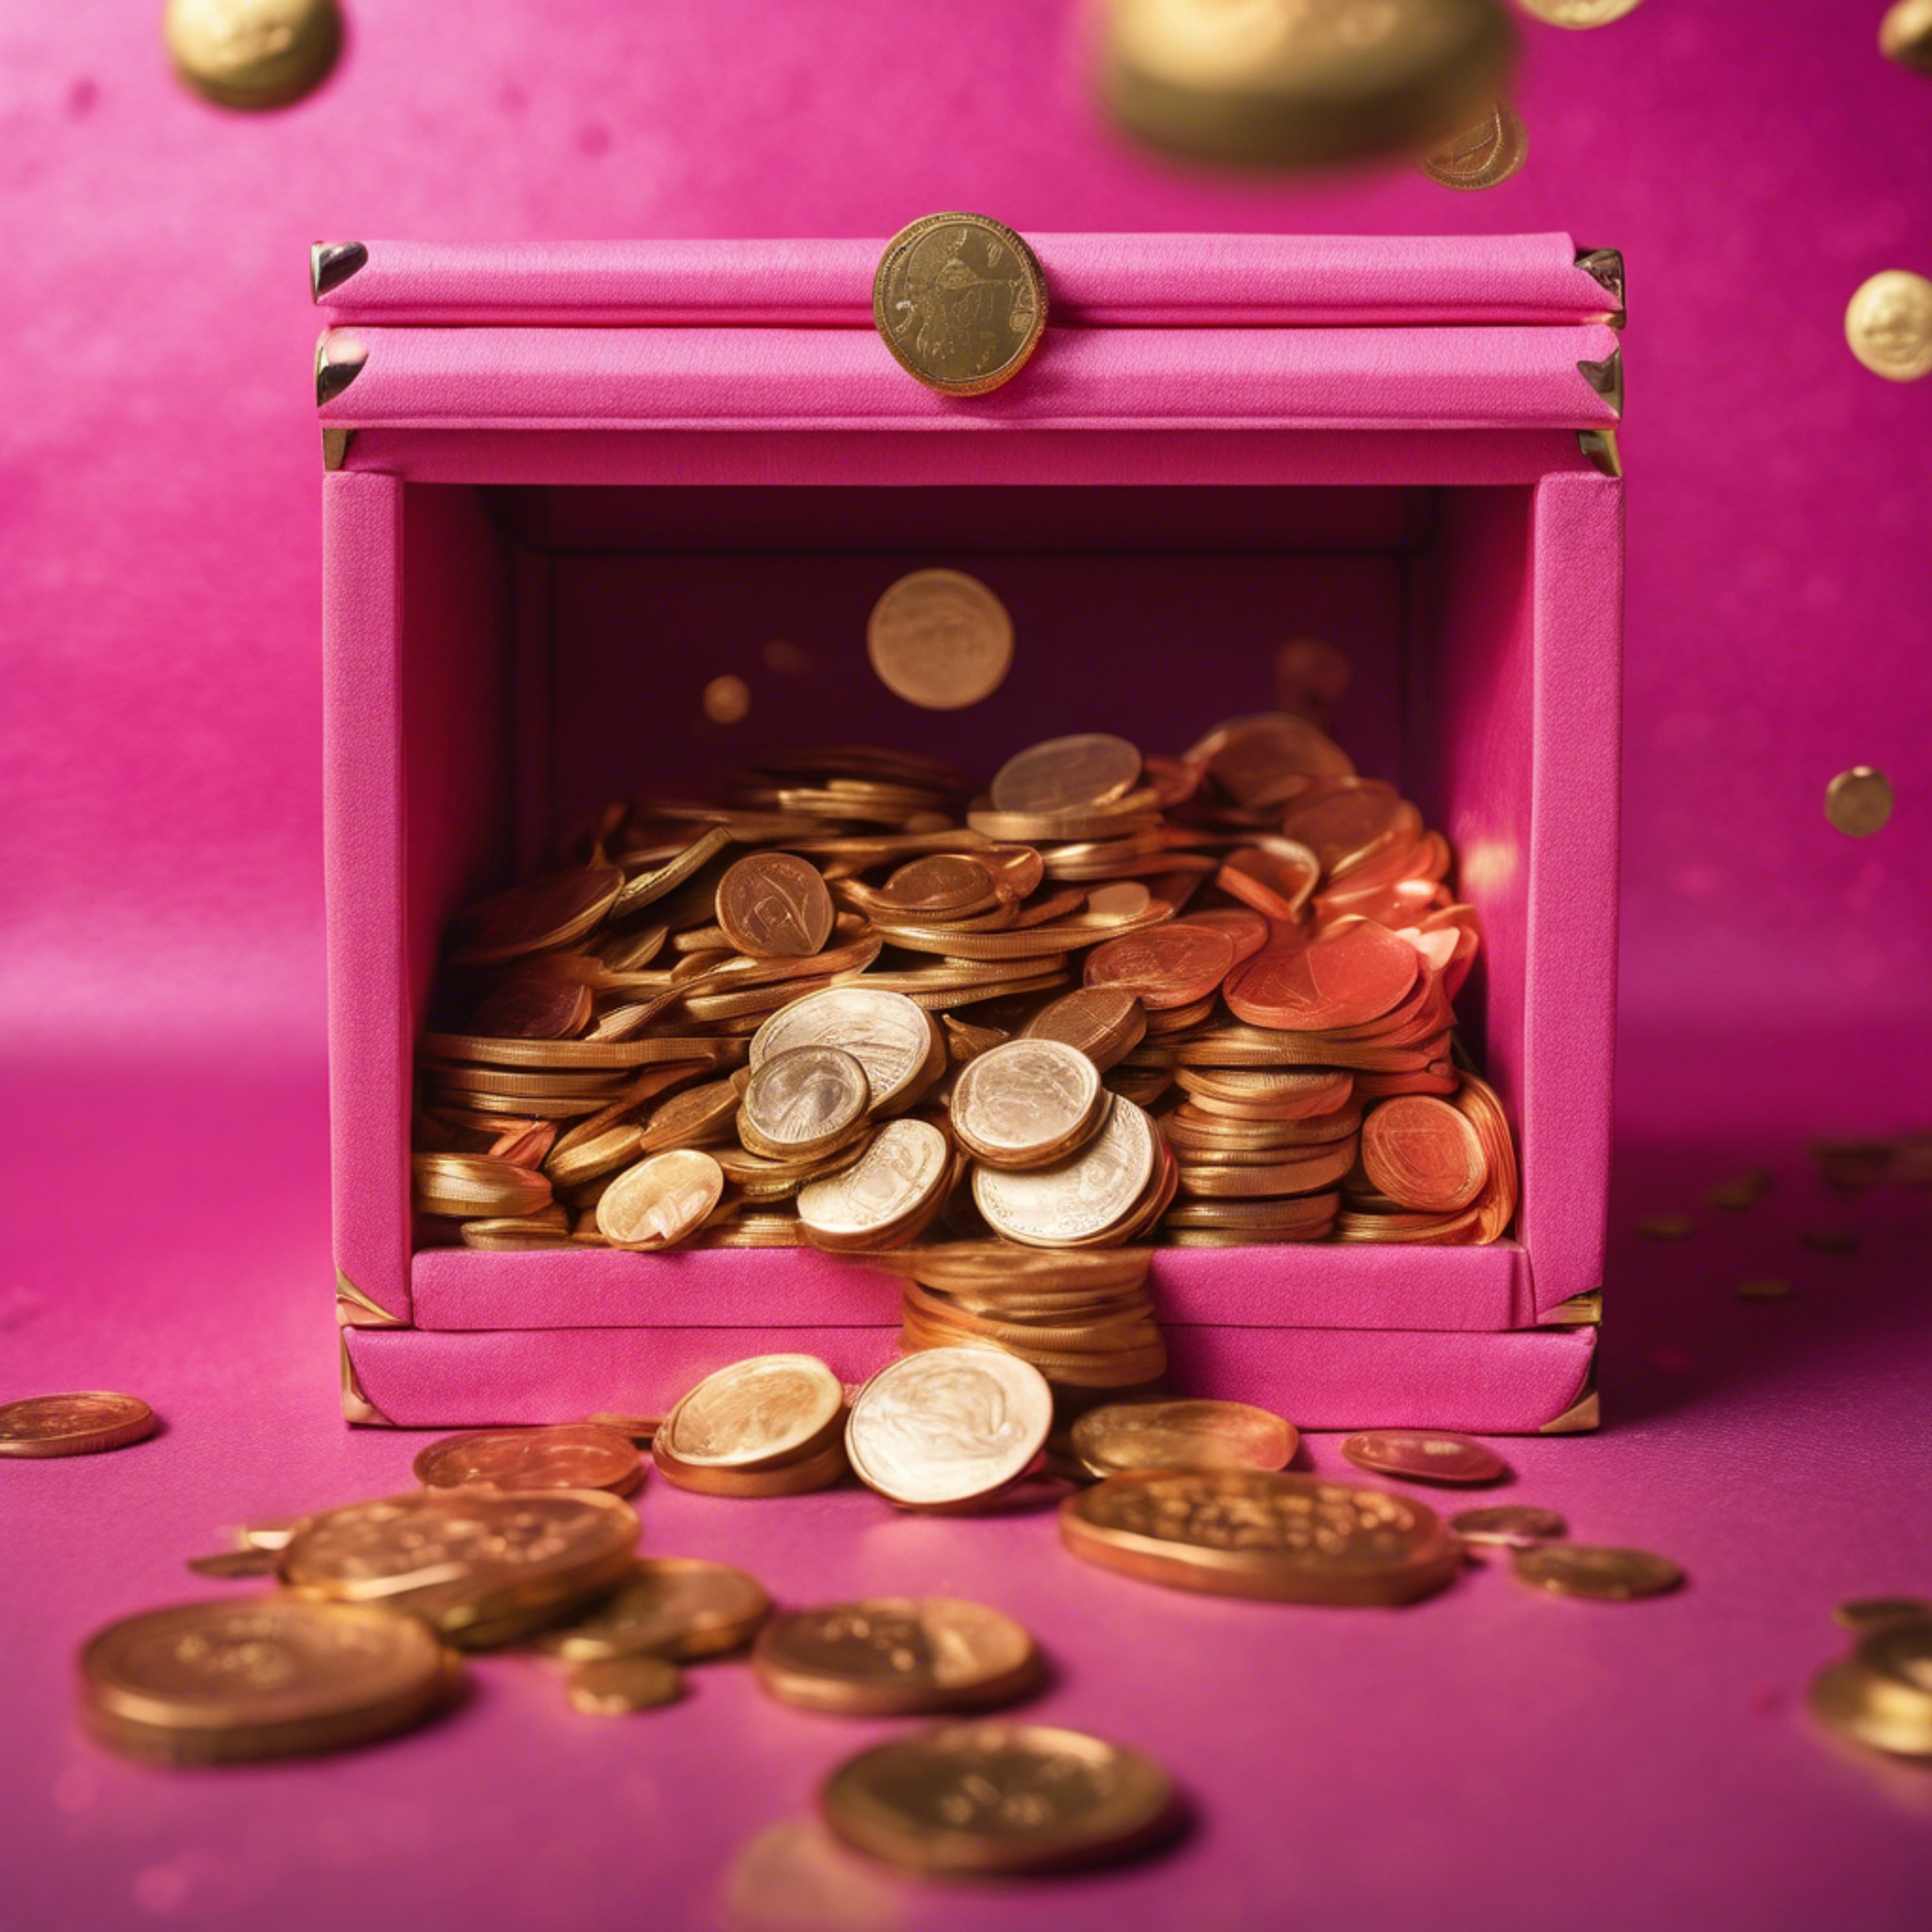 Pink and gold coins showering down on a colorful treasury box.壁紙[fe633ea5a3d14ce2affa]